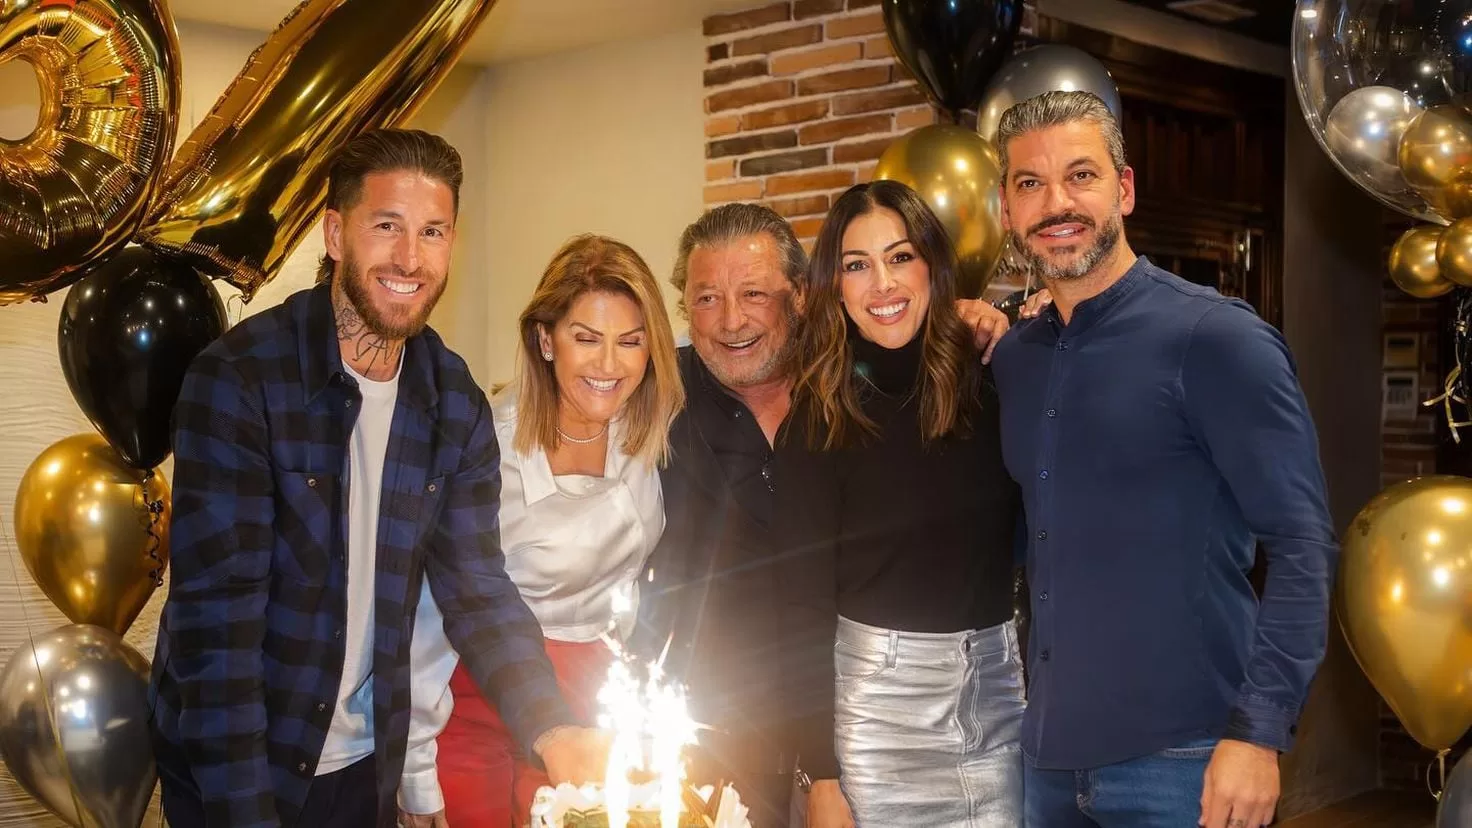 Sergio Ramos attends his mother's birthday without Pilar Rubio
